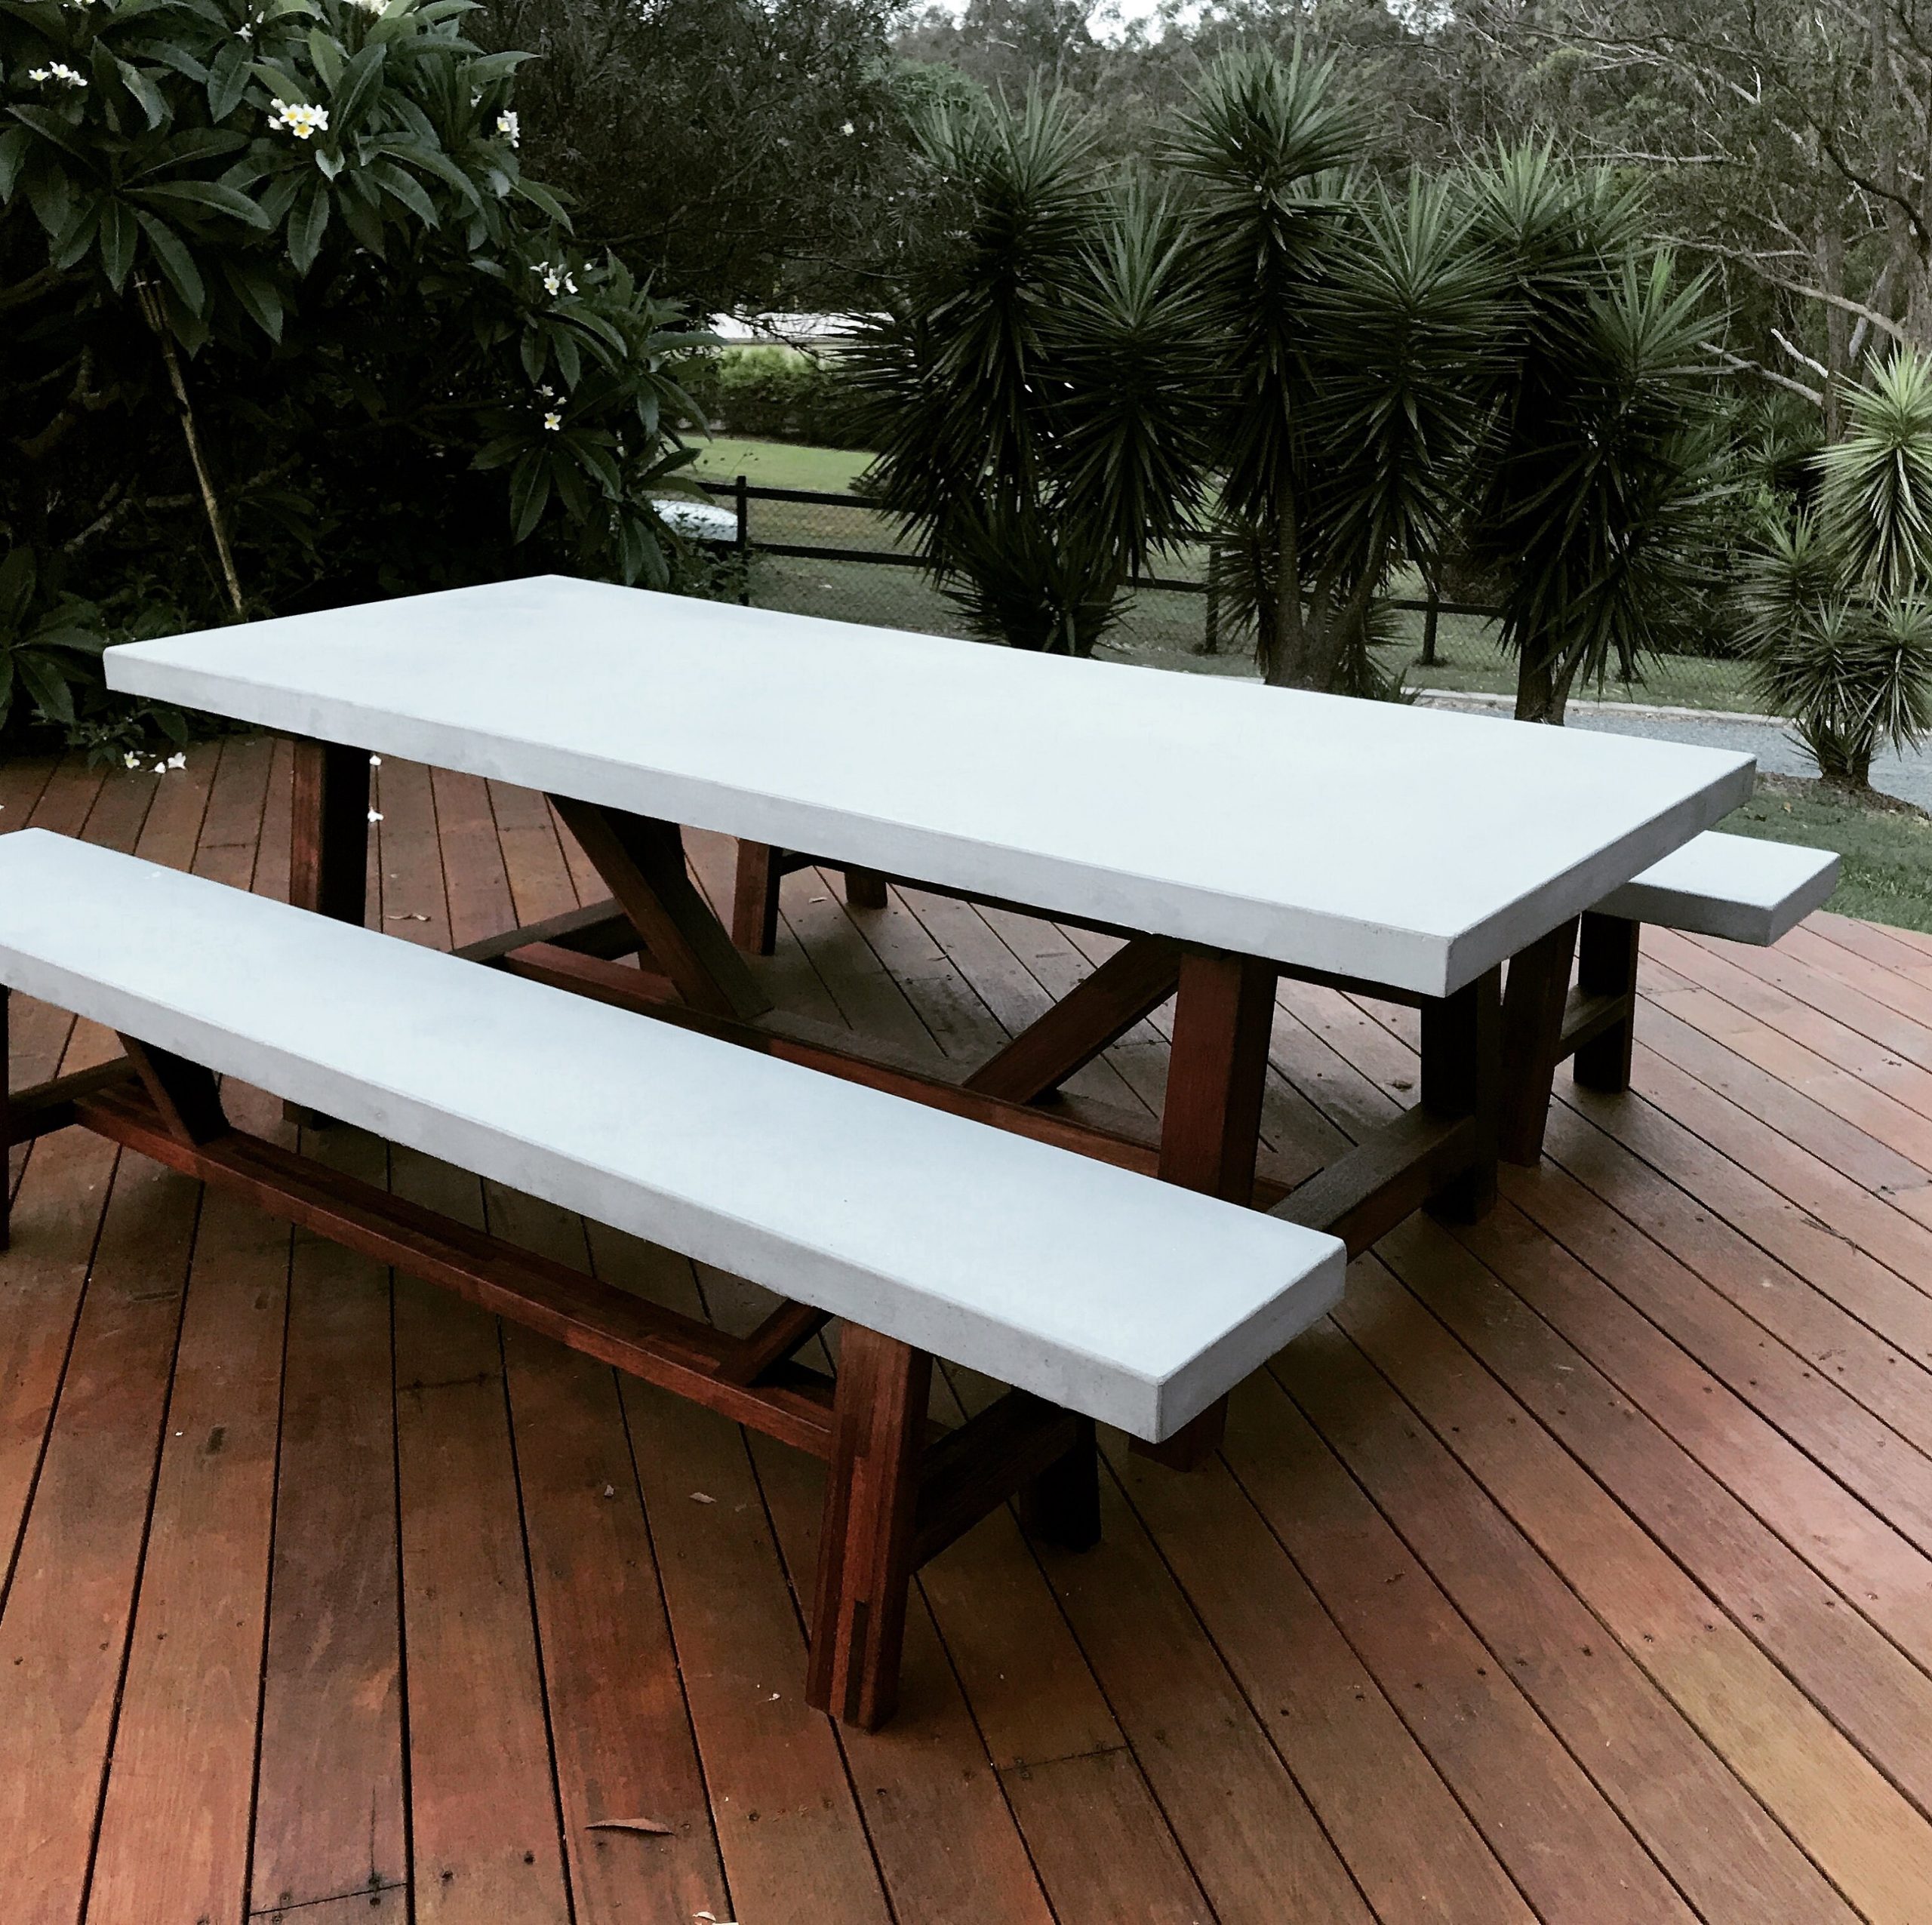 DINING ON CONCRETE – THE INS AND OUTS OF OWNING A CONCRETE DINING TABLE